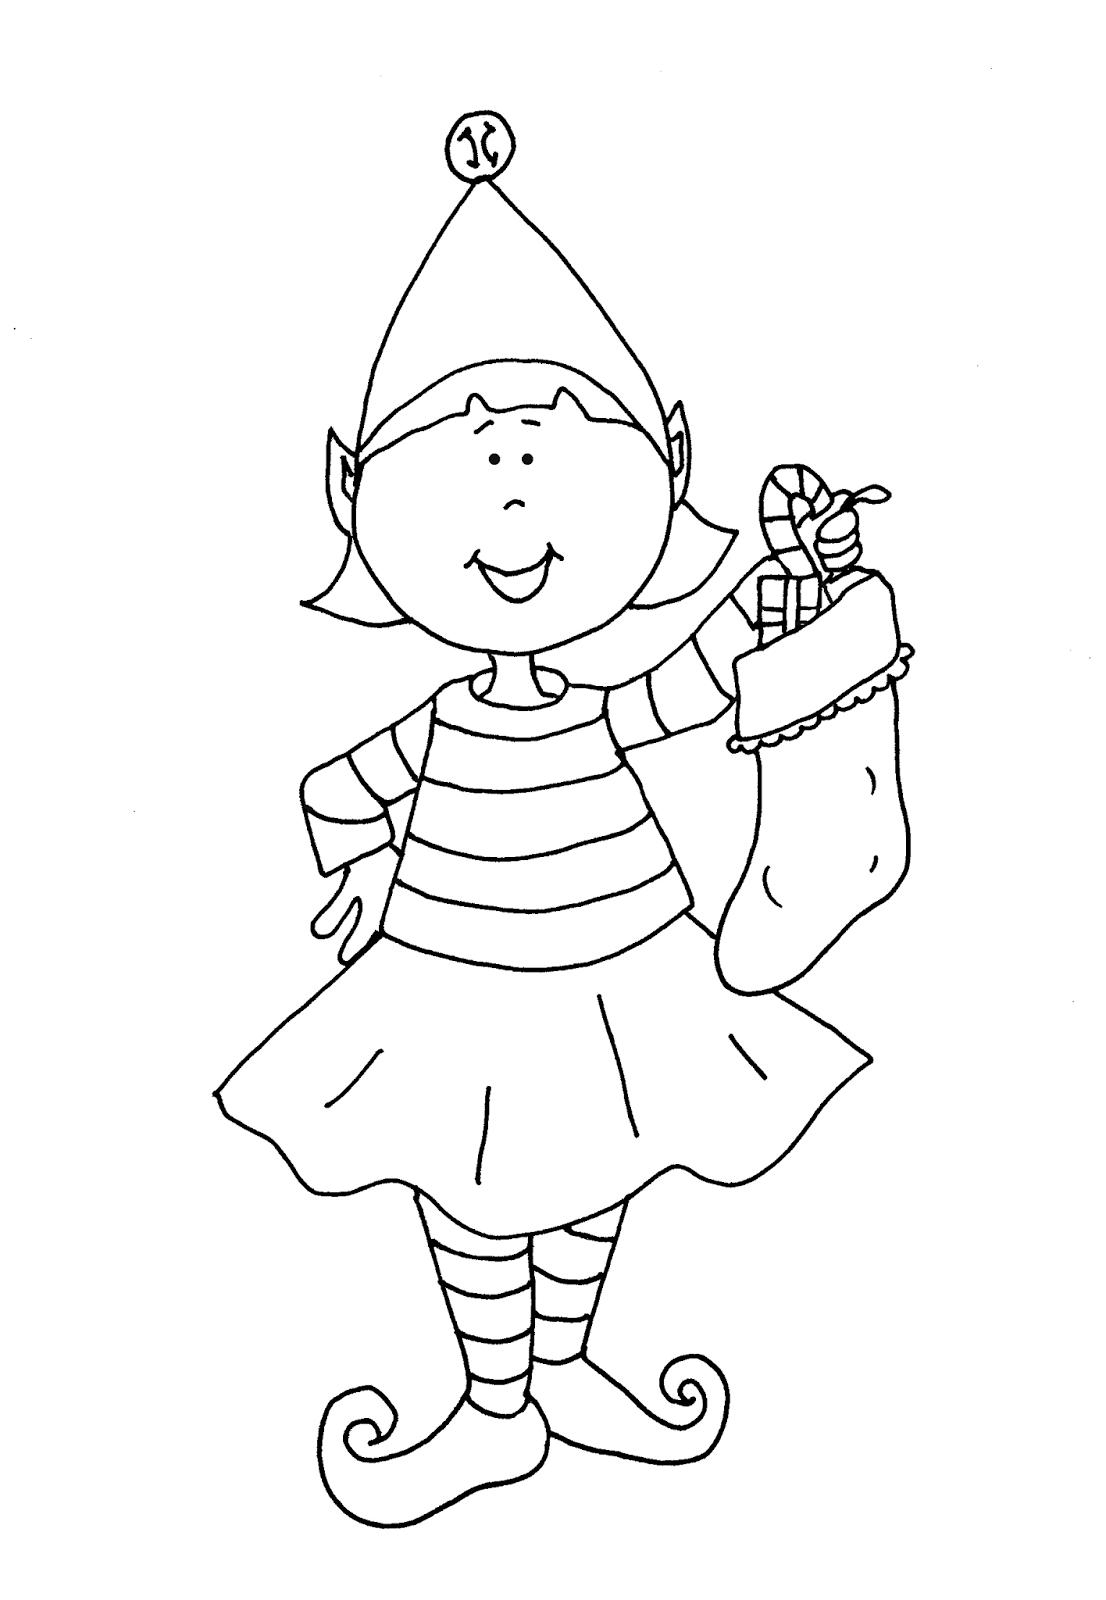 Simple Elf Drawing At Getdrawings | Free Download pour Coloriage Elf